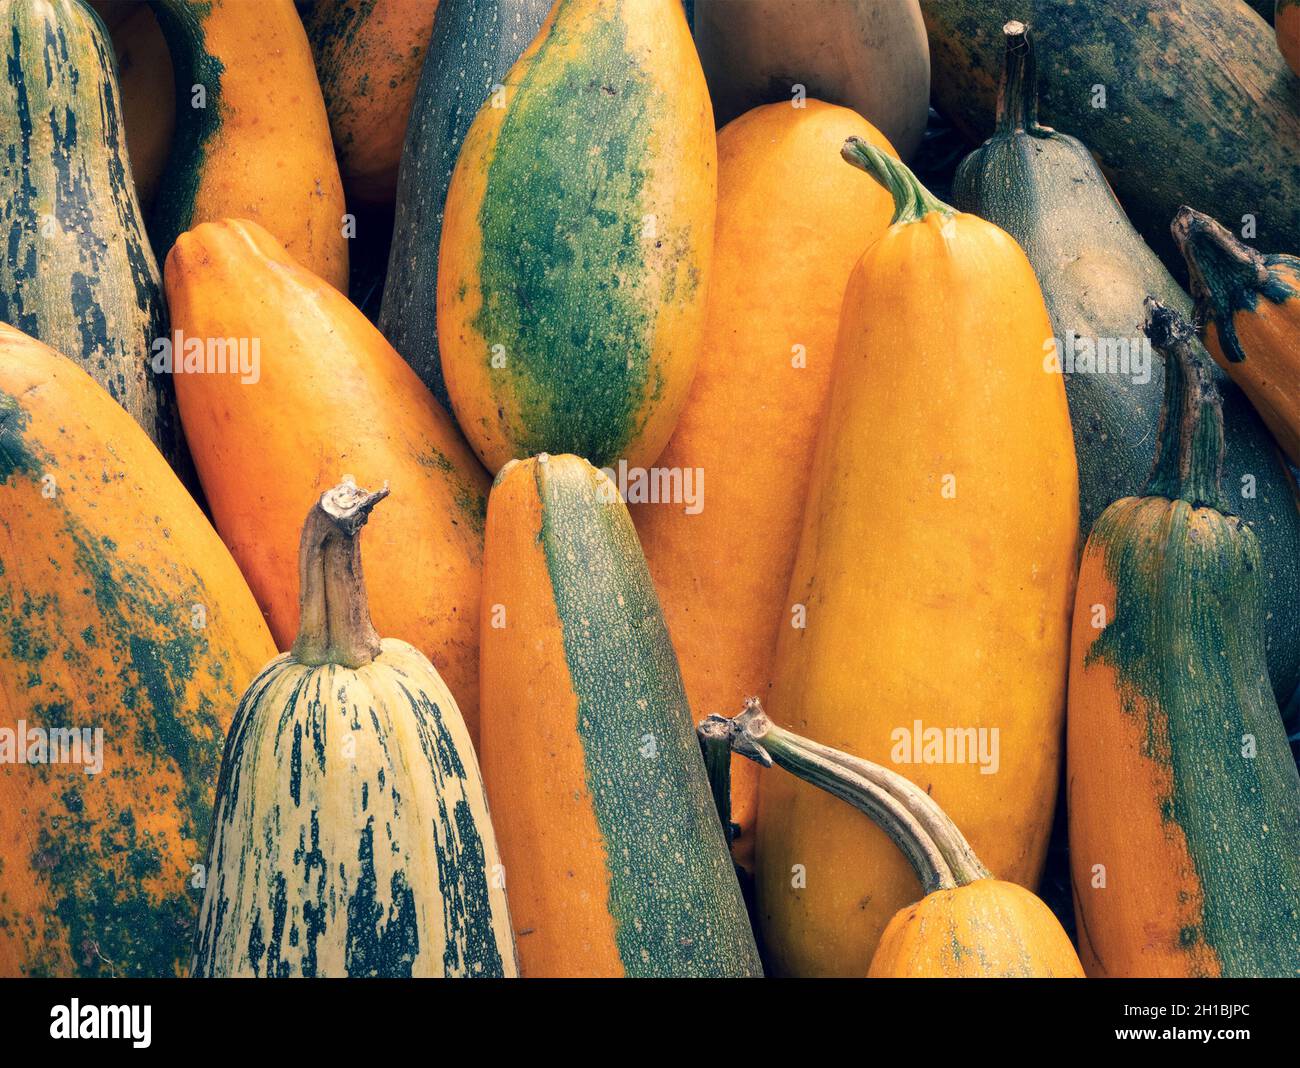 Large, long zucchini, courgette and marrow with yellow or dark green skin. Harvested vegetables. Autumn harvest Stock Photo